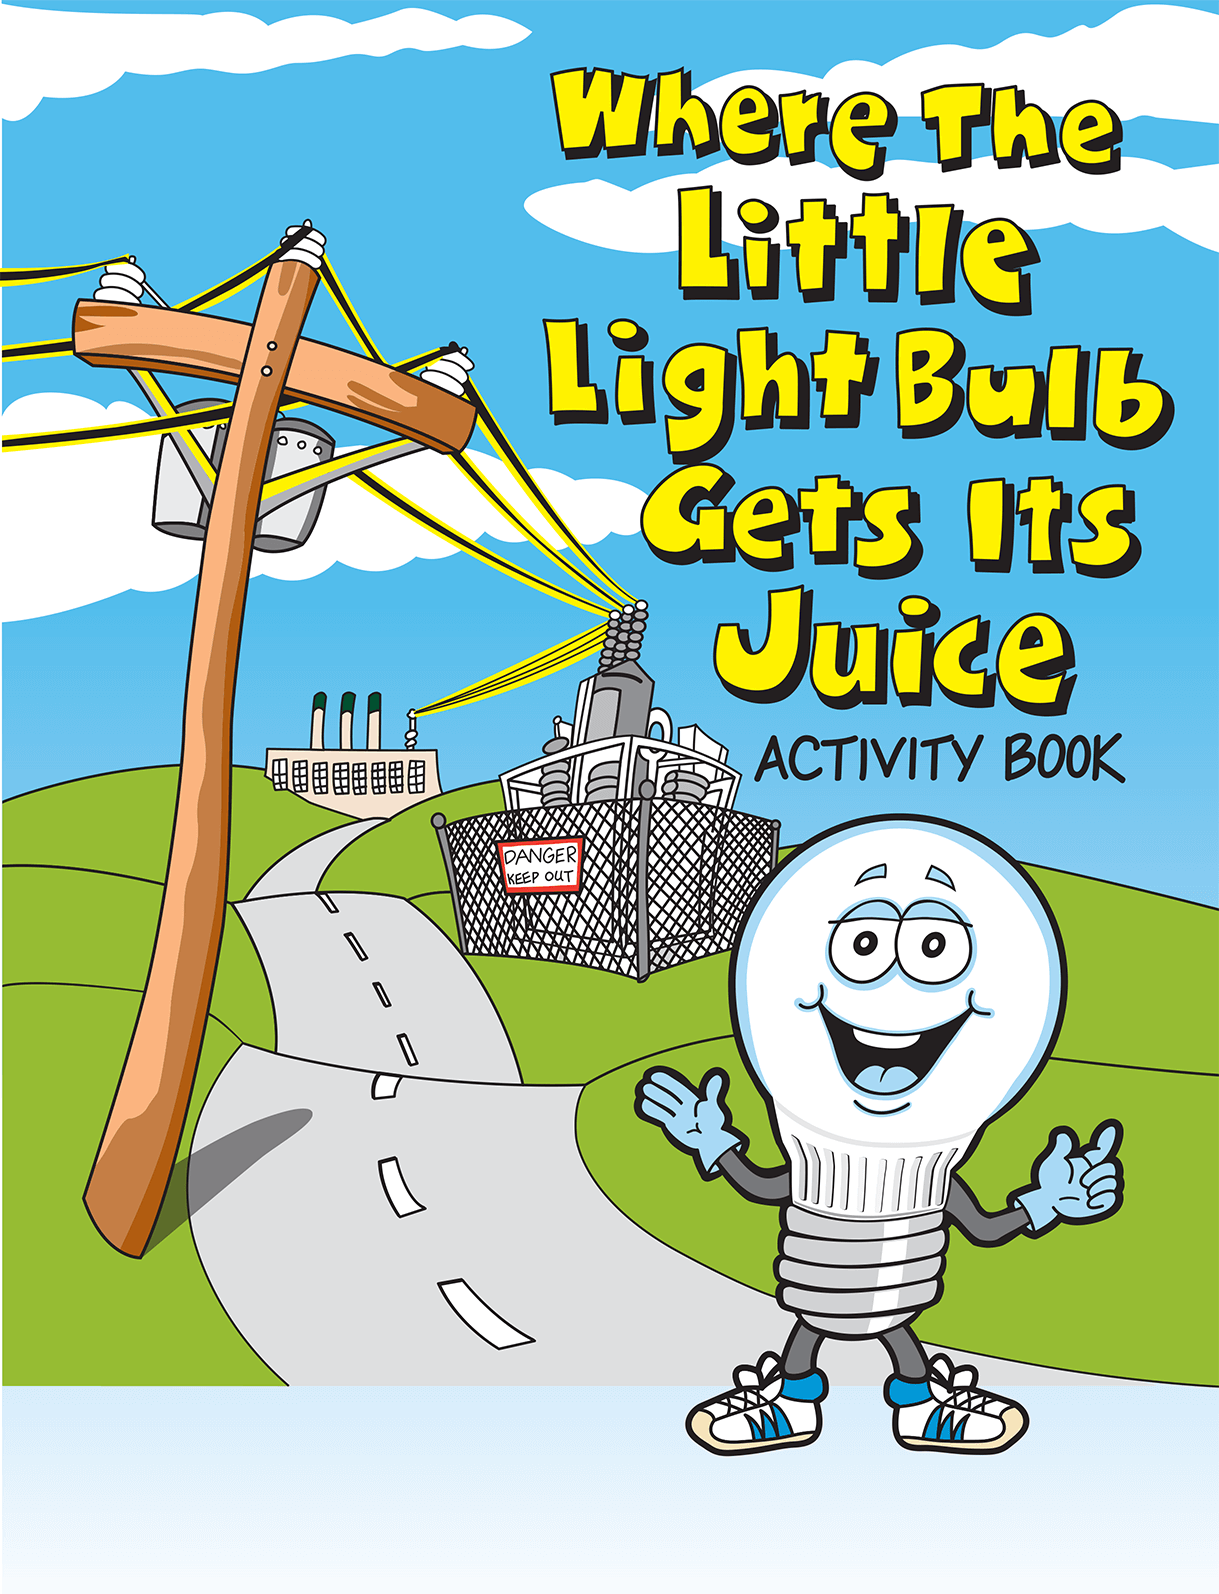 Illustrated Where The Little Light Bulb Gets Its Juice Activity Book cover